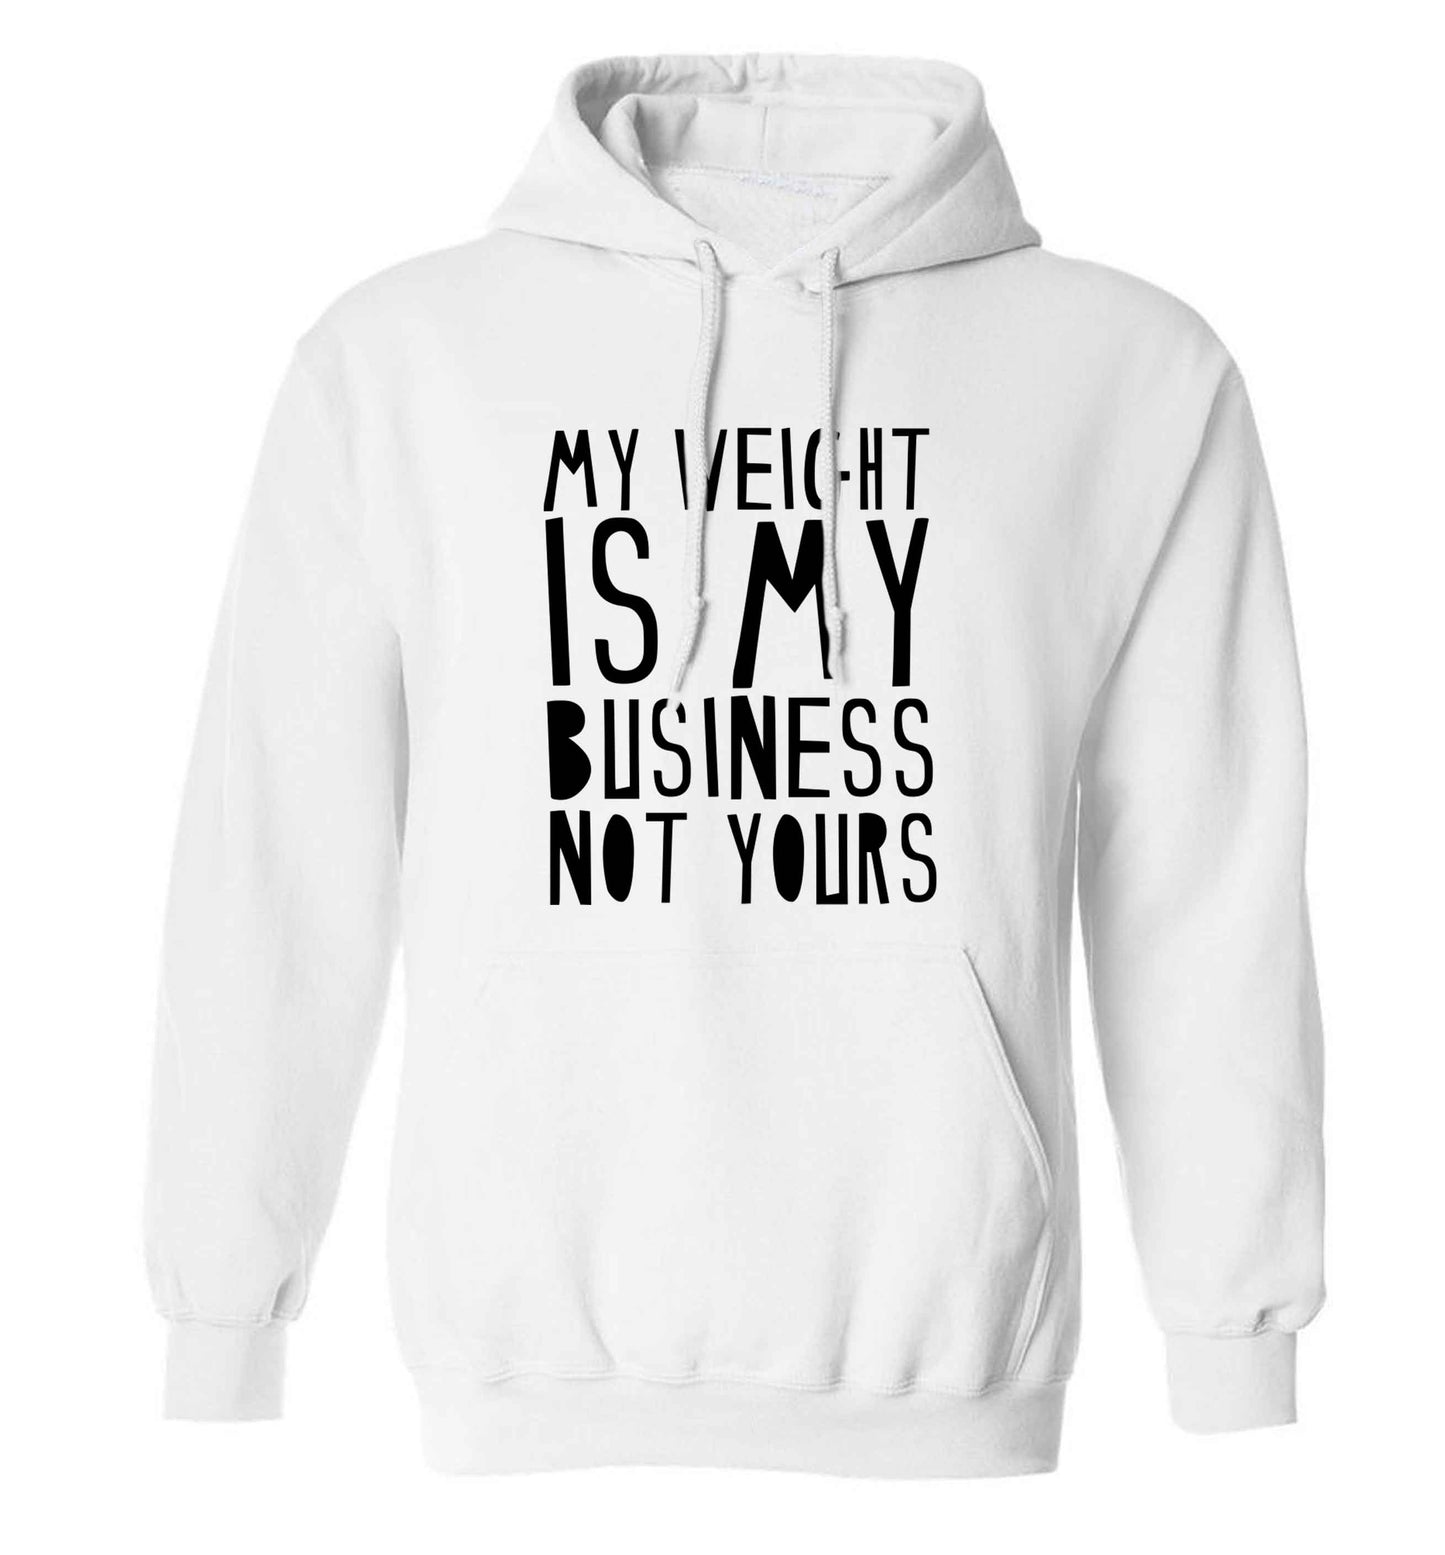 My weight is my business not yours adults unisex white hoodie 2XL